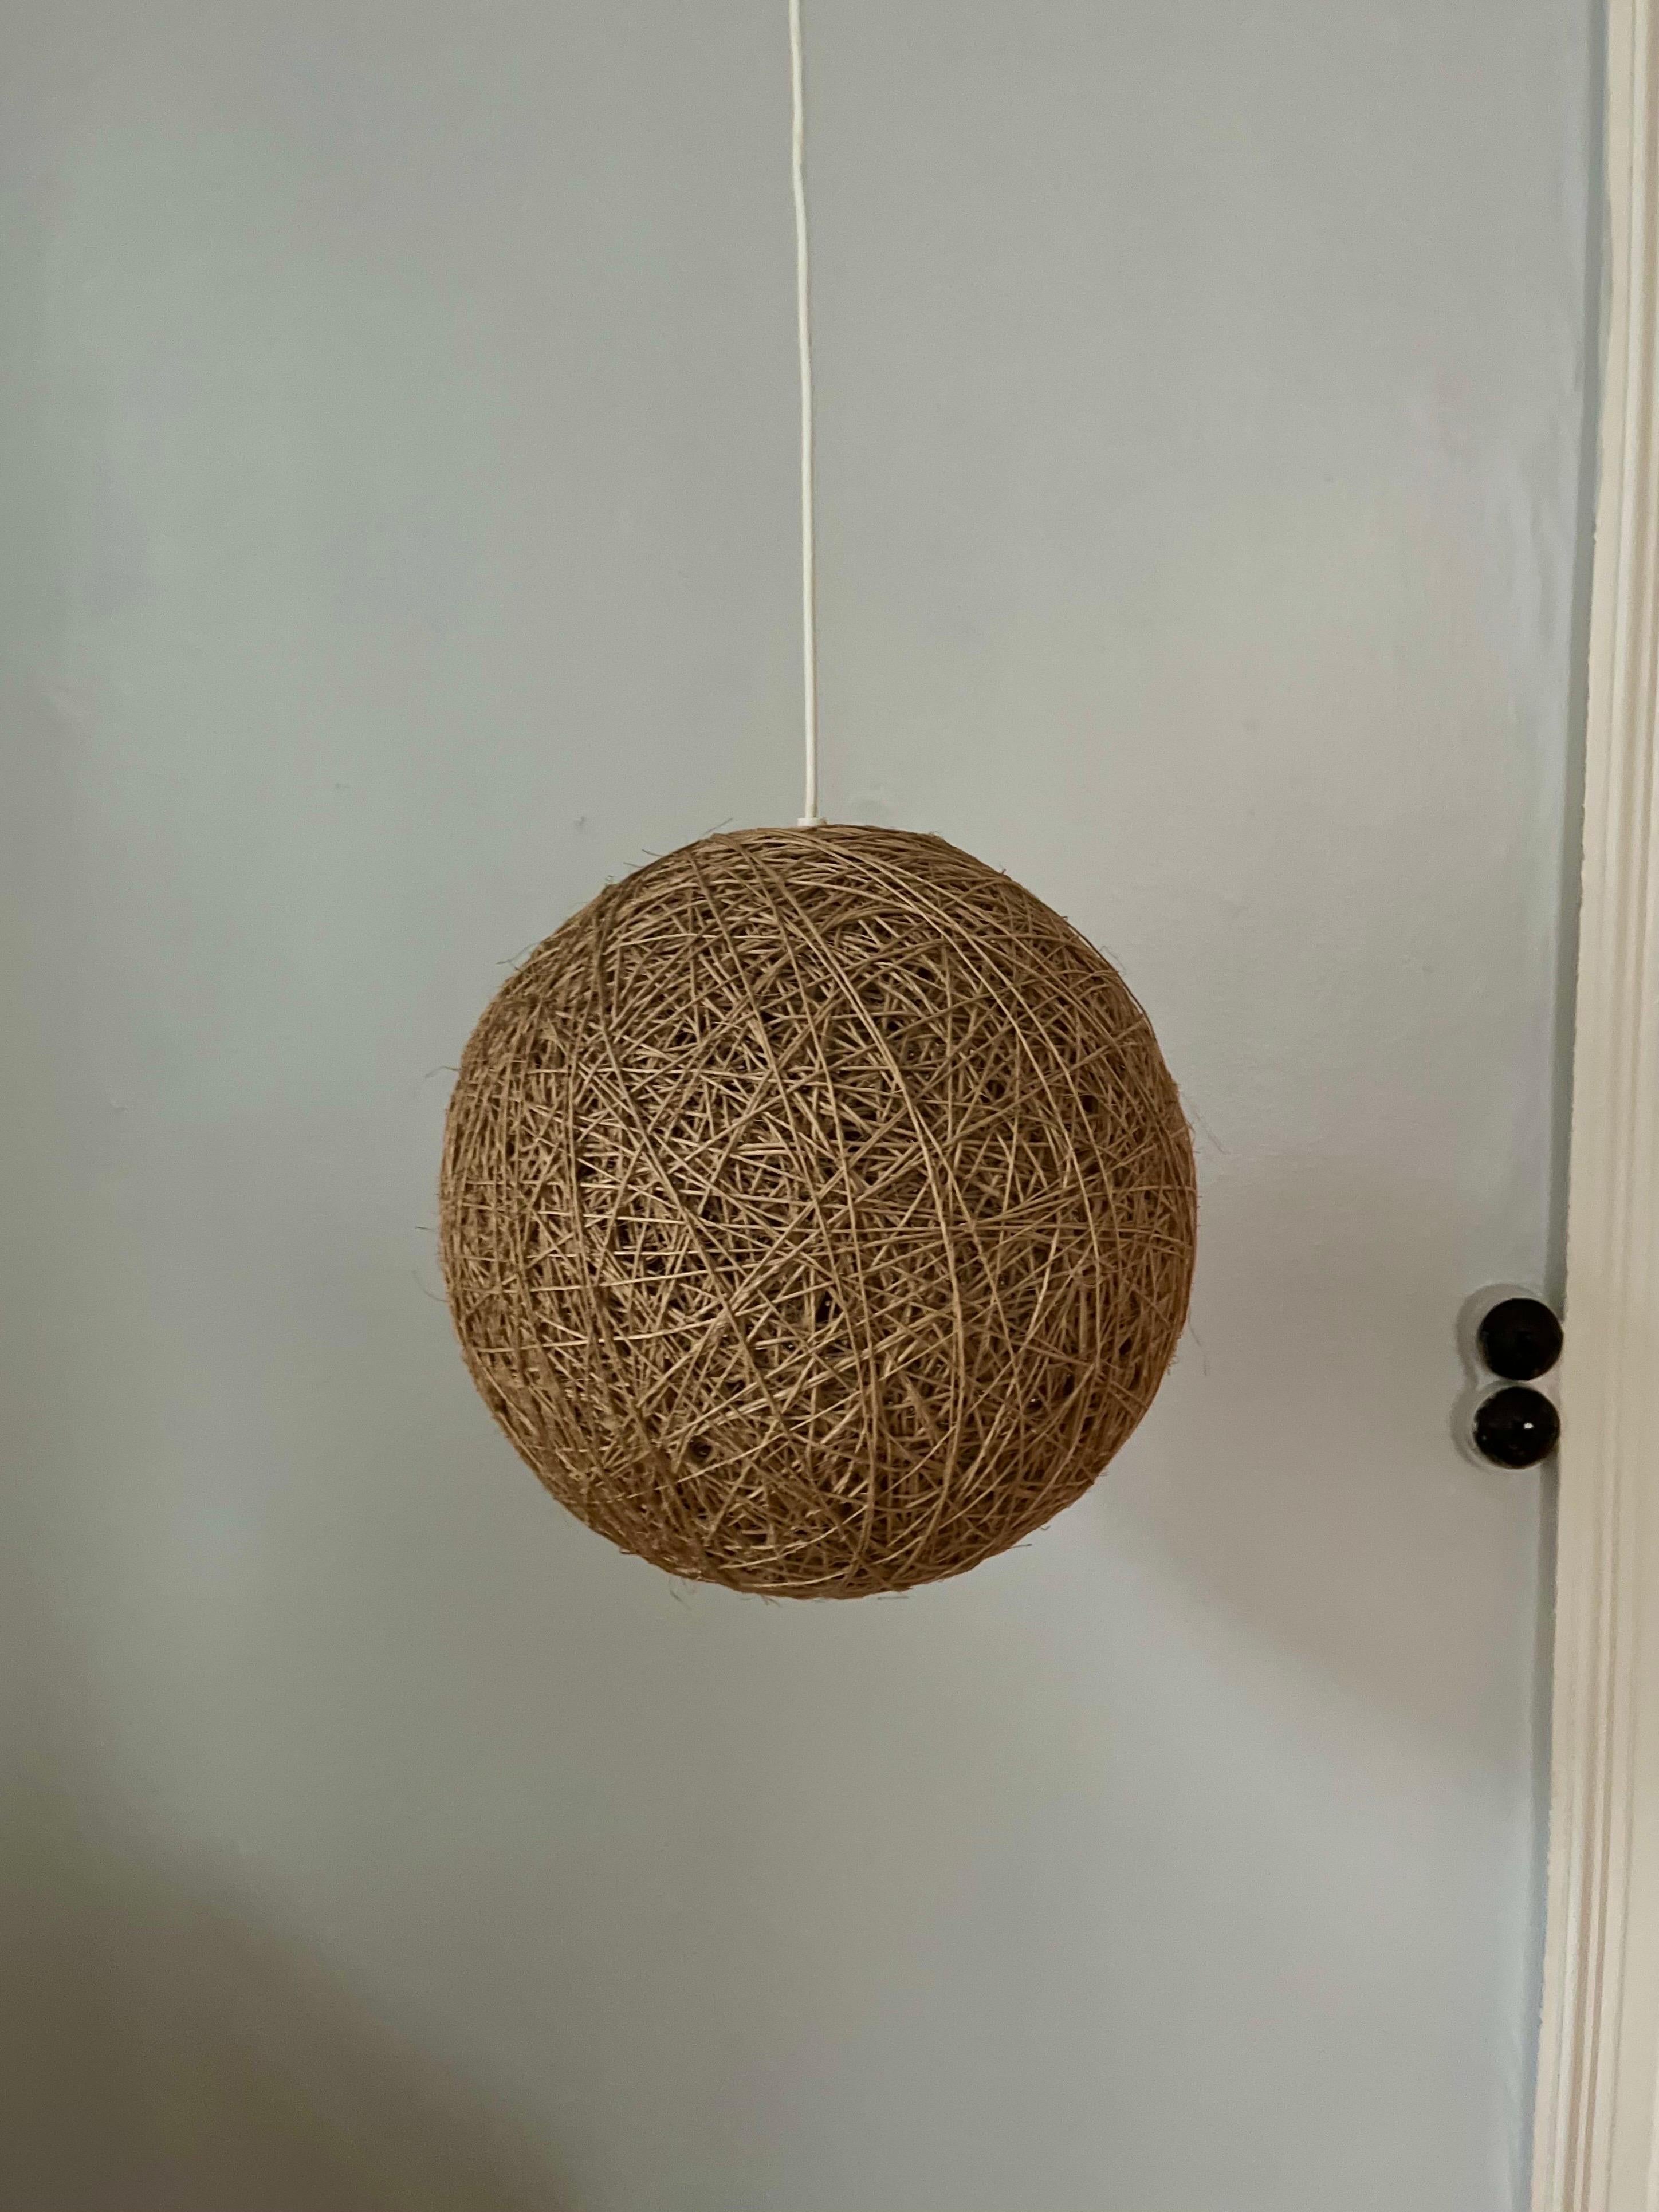 Handmade string hemp pendant 1960s/1970s. This Danish string light pendant is made from wrapped hemp in a round, almost circular shape. The socket is fitted in a wood mounting.

Height: 30,3 cm (11.93 in)
Width/depth: 31 cm (12.20 in)